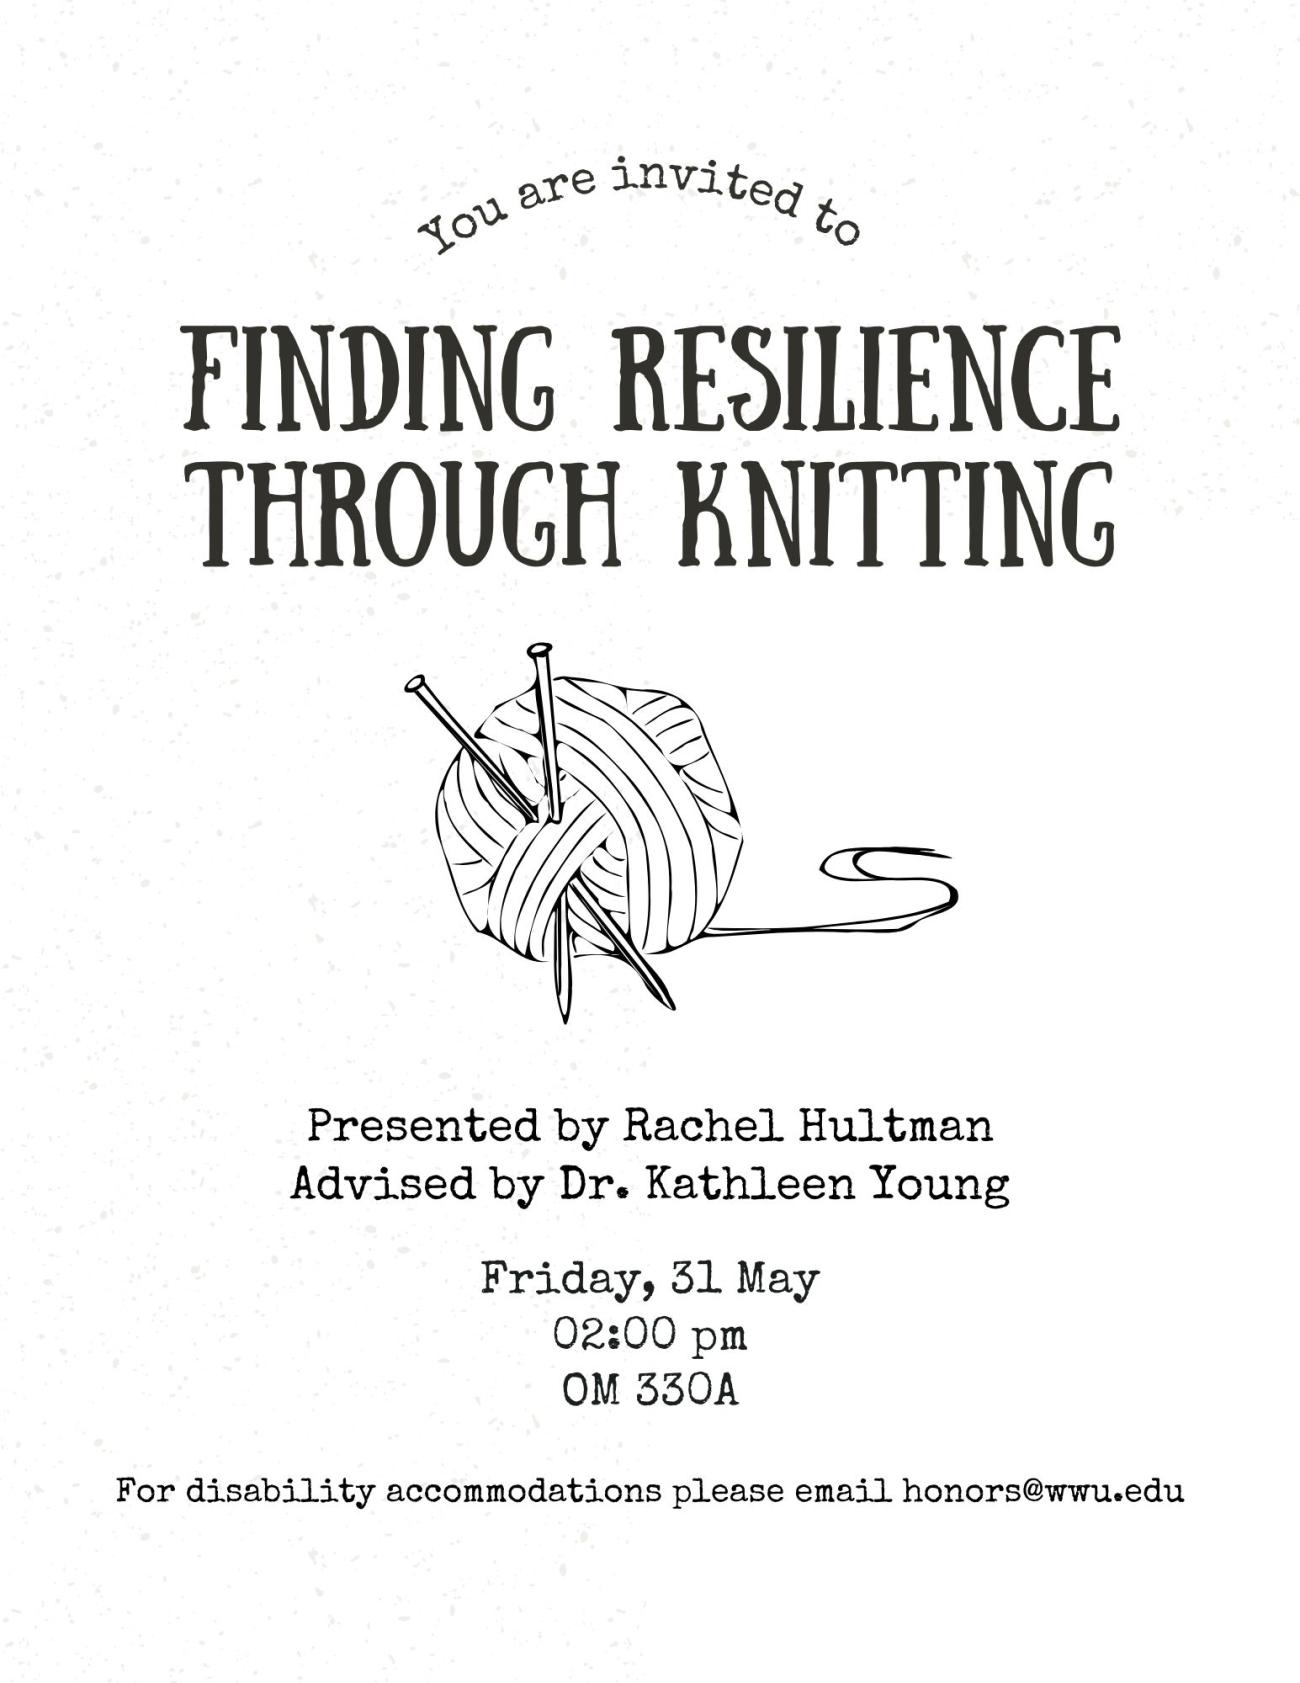 A white background with black text containing a line drawing of two knitting needles stuck through a ball of yarn. The text reads “You are invited to Finding Resilience Through Knitting. Presented by Rachel Hultman. Advised by Dr. Kathleen Young. Friday, May 31st. 2:00 pm. OM 330A. For disability accommodations please email honors@wwu.edu”.